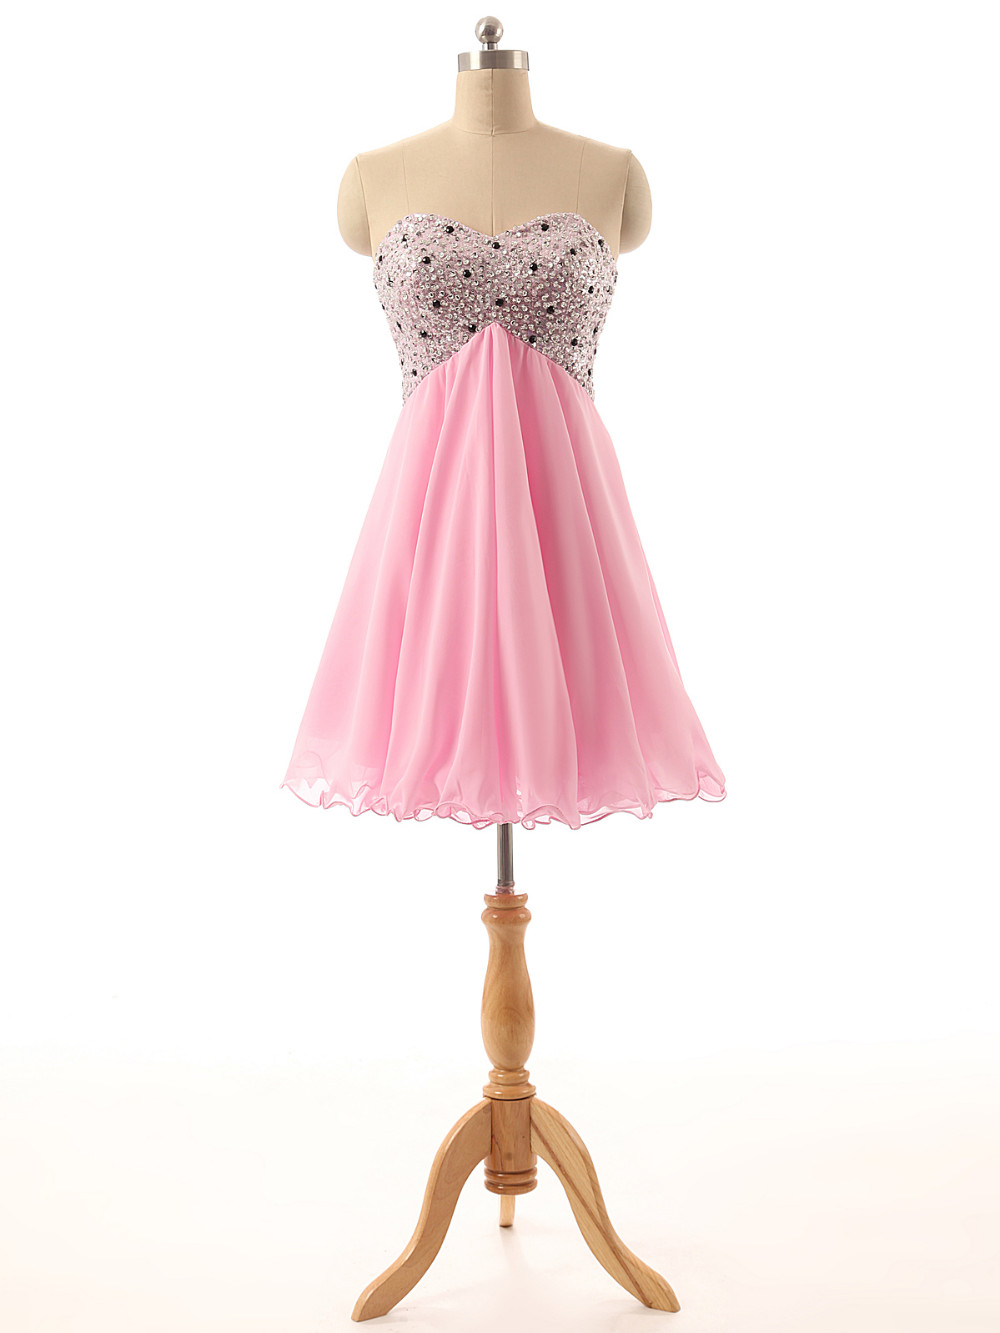 Above Knee Pink Short Chiffon Homecoming Dresses Strapless Beaded Party Dresses